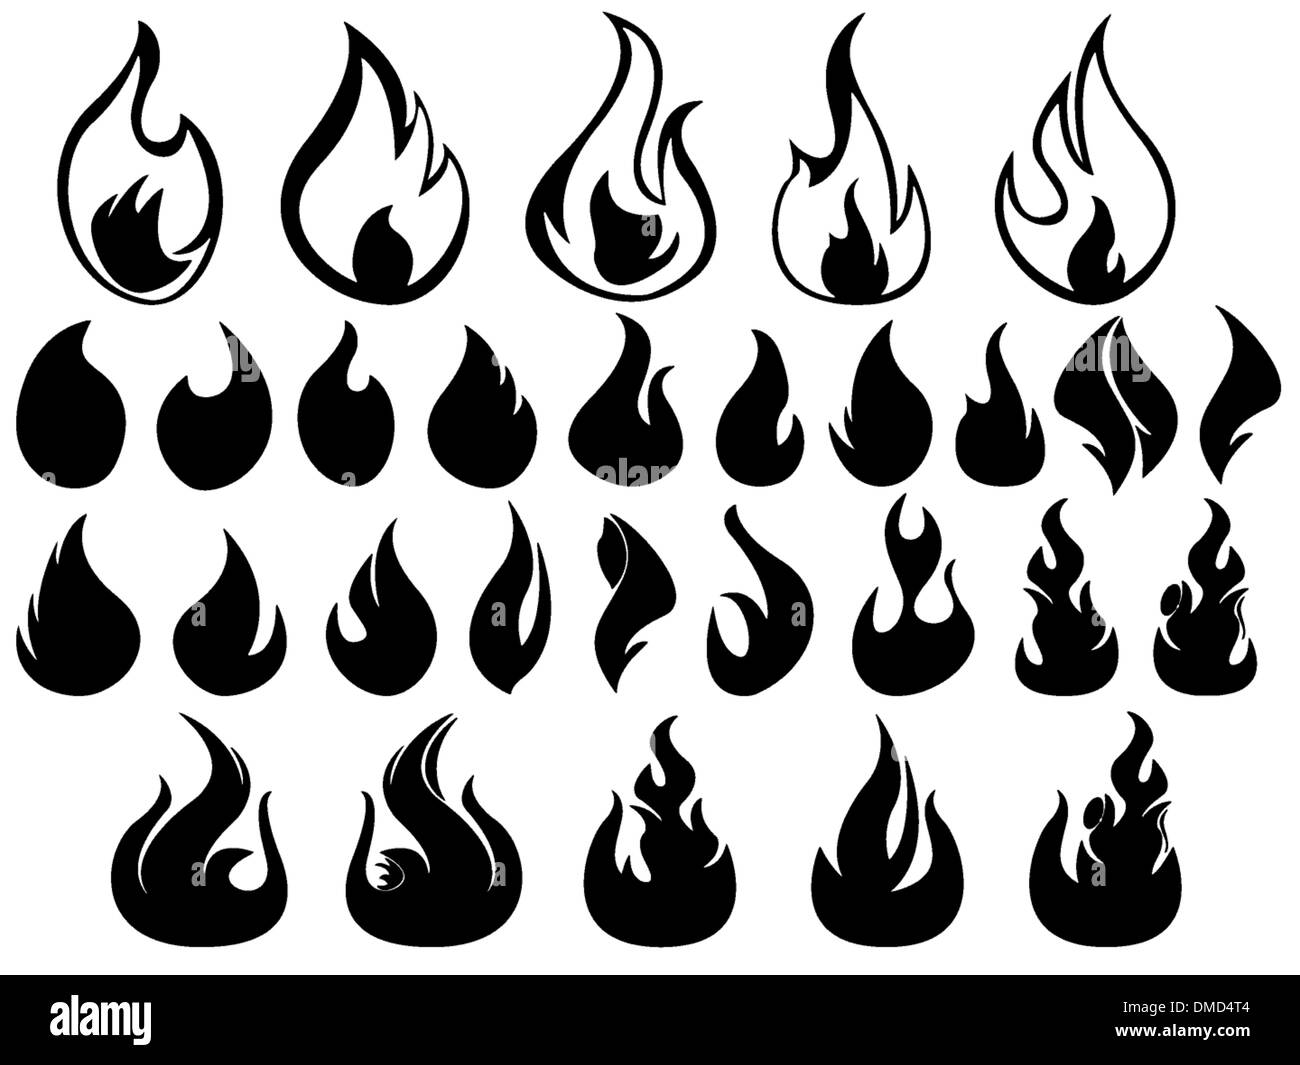 Flames illustrated on white Stock Vector